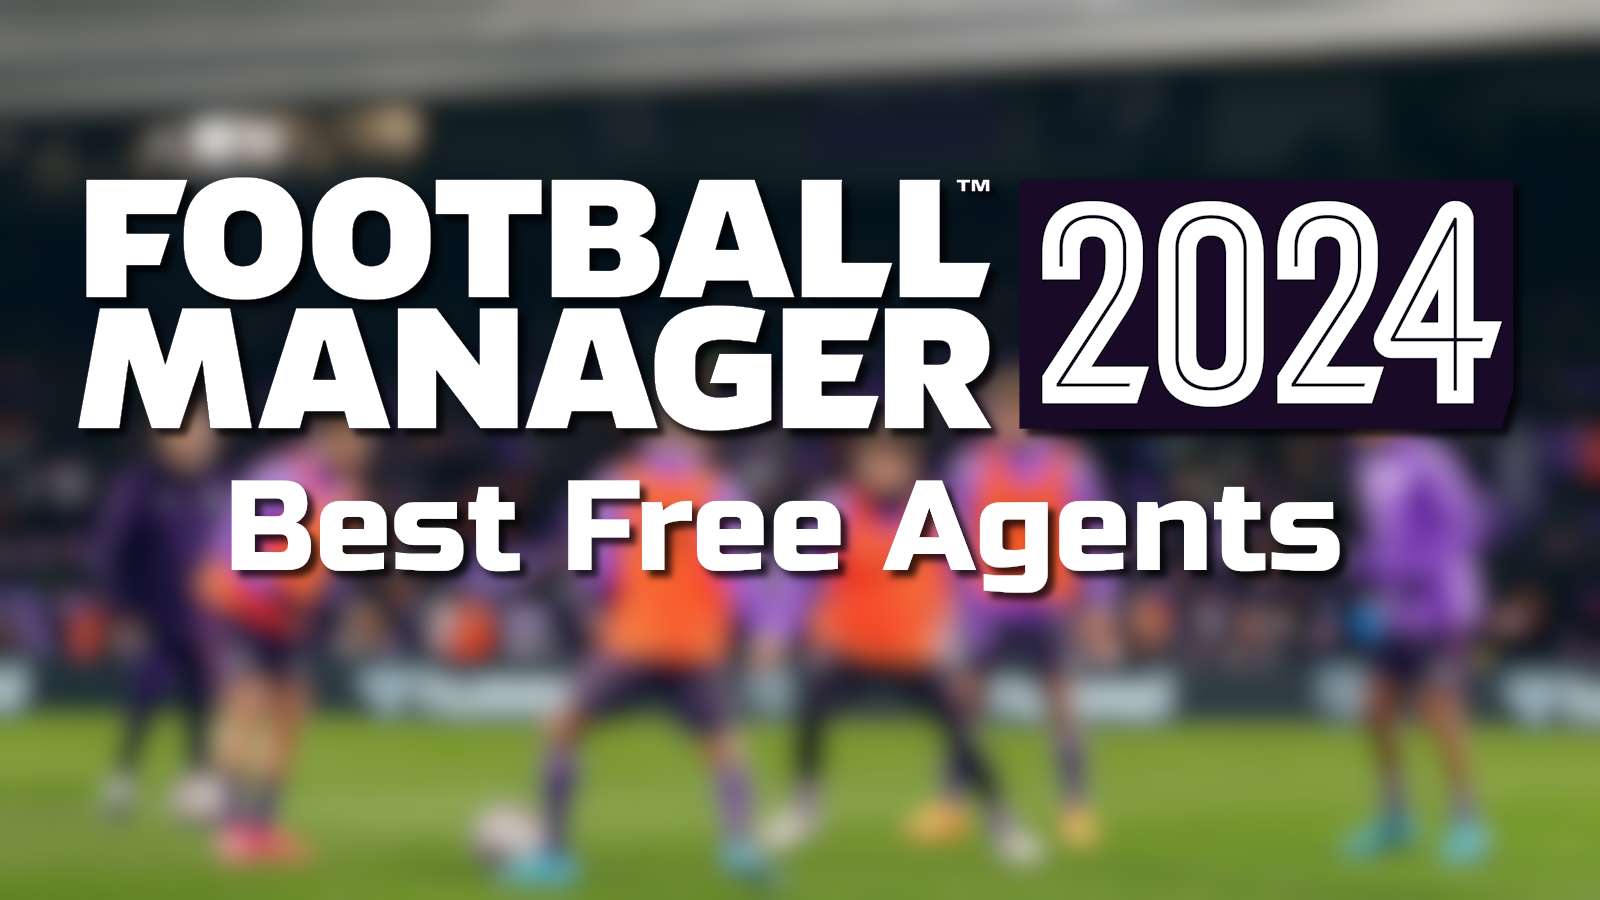 Football Manager 2024 key art blurred with best free agents thumbnail in foreground,